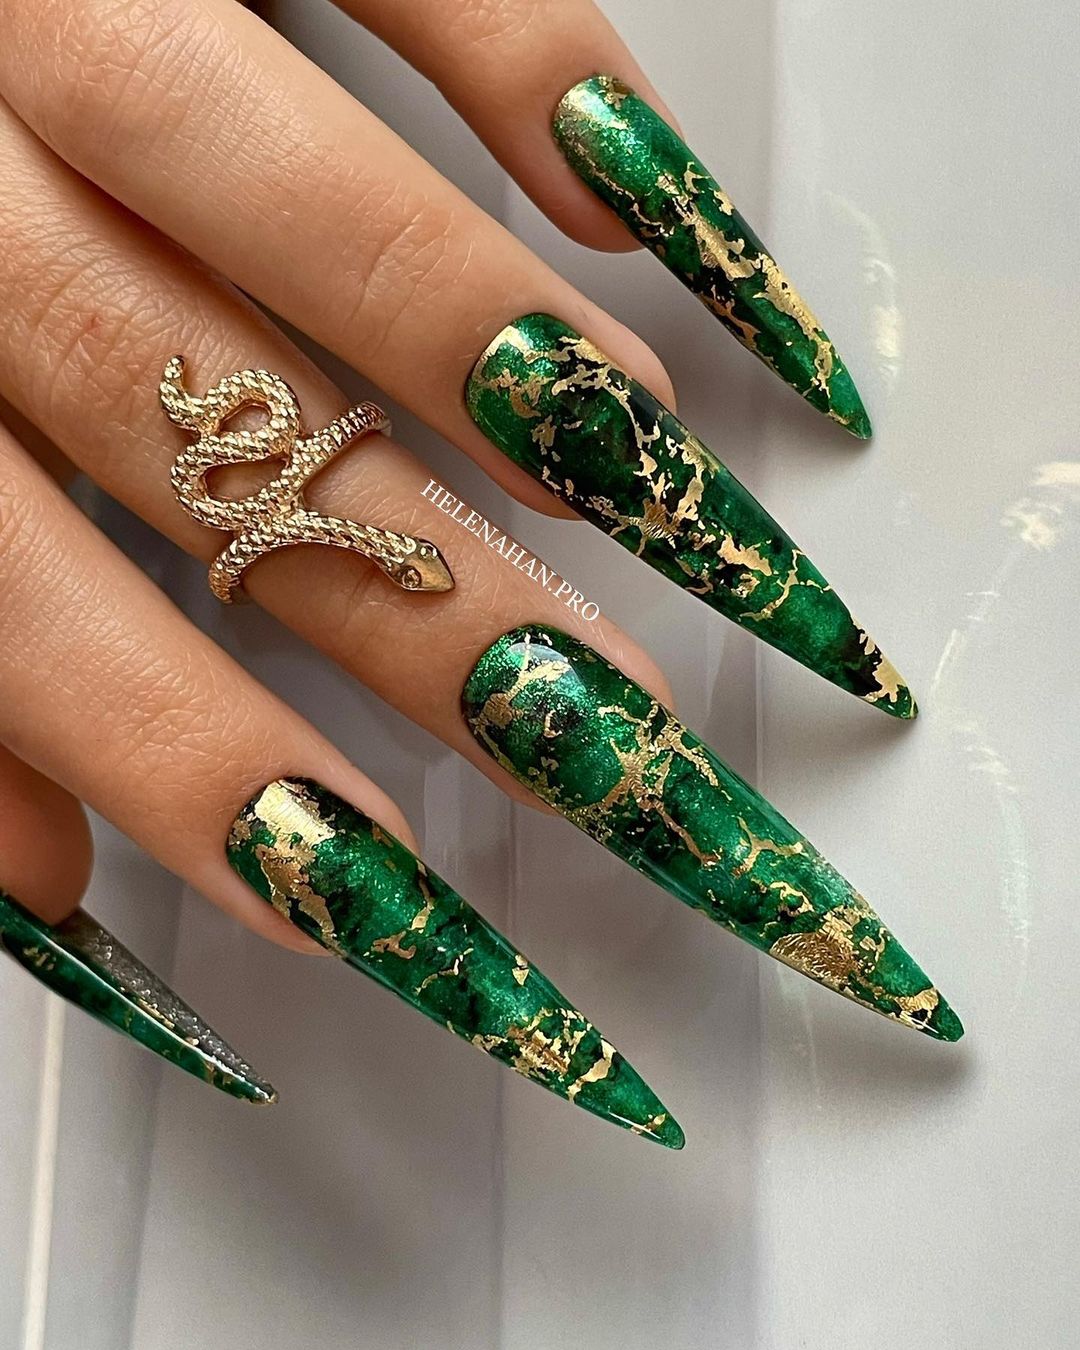 Acrylic Stiletto Nails with Green Marble Design